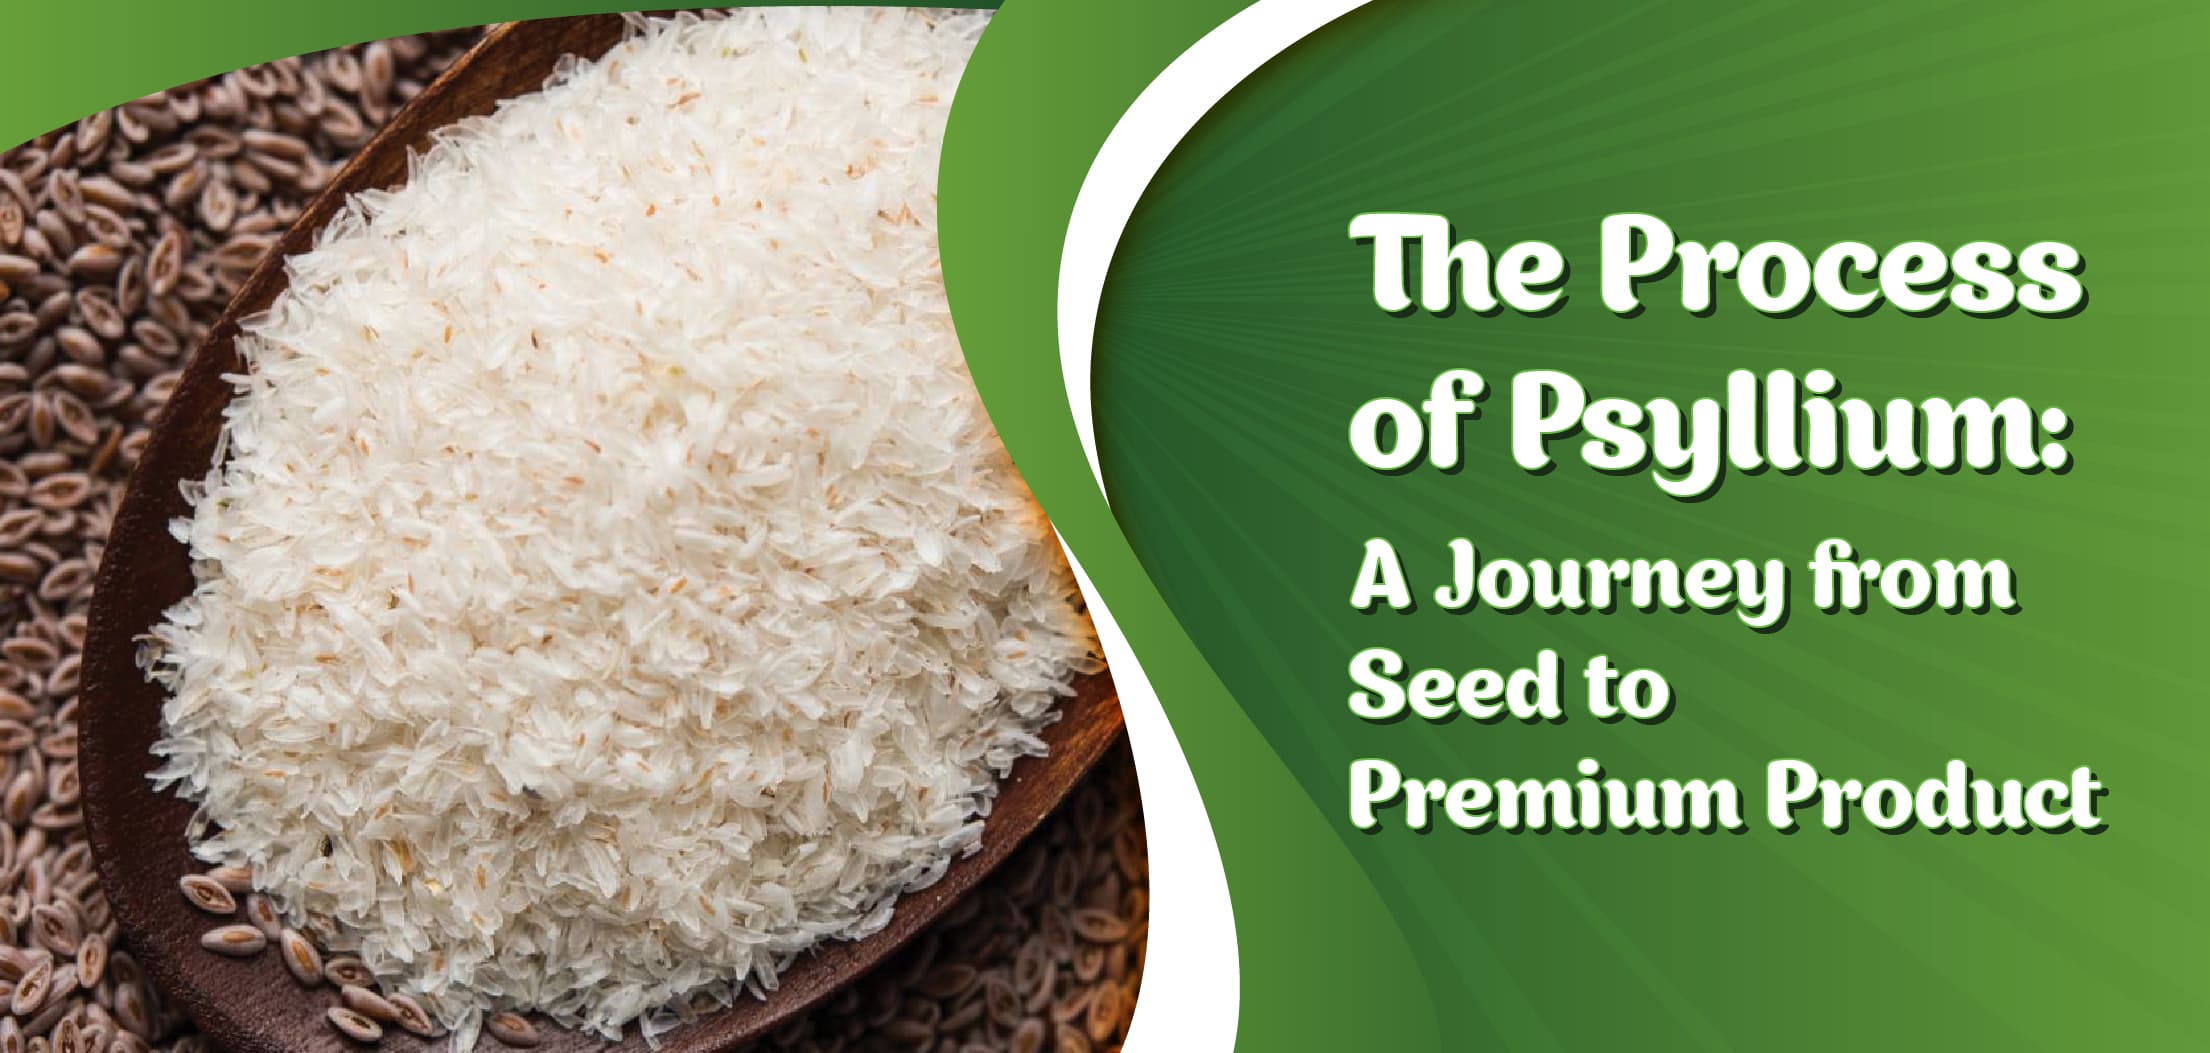 The Process of Psyllium: A Journey from Seed to Premium Product